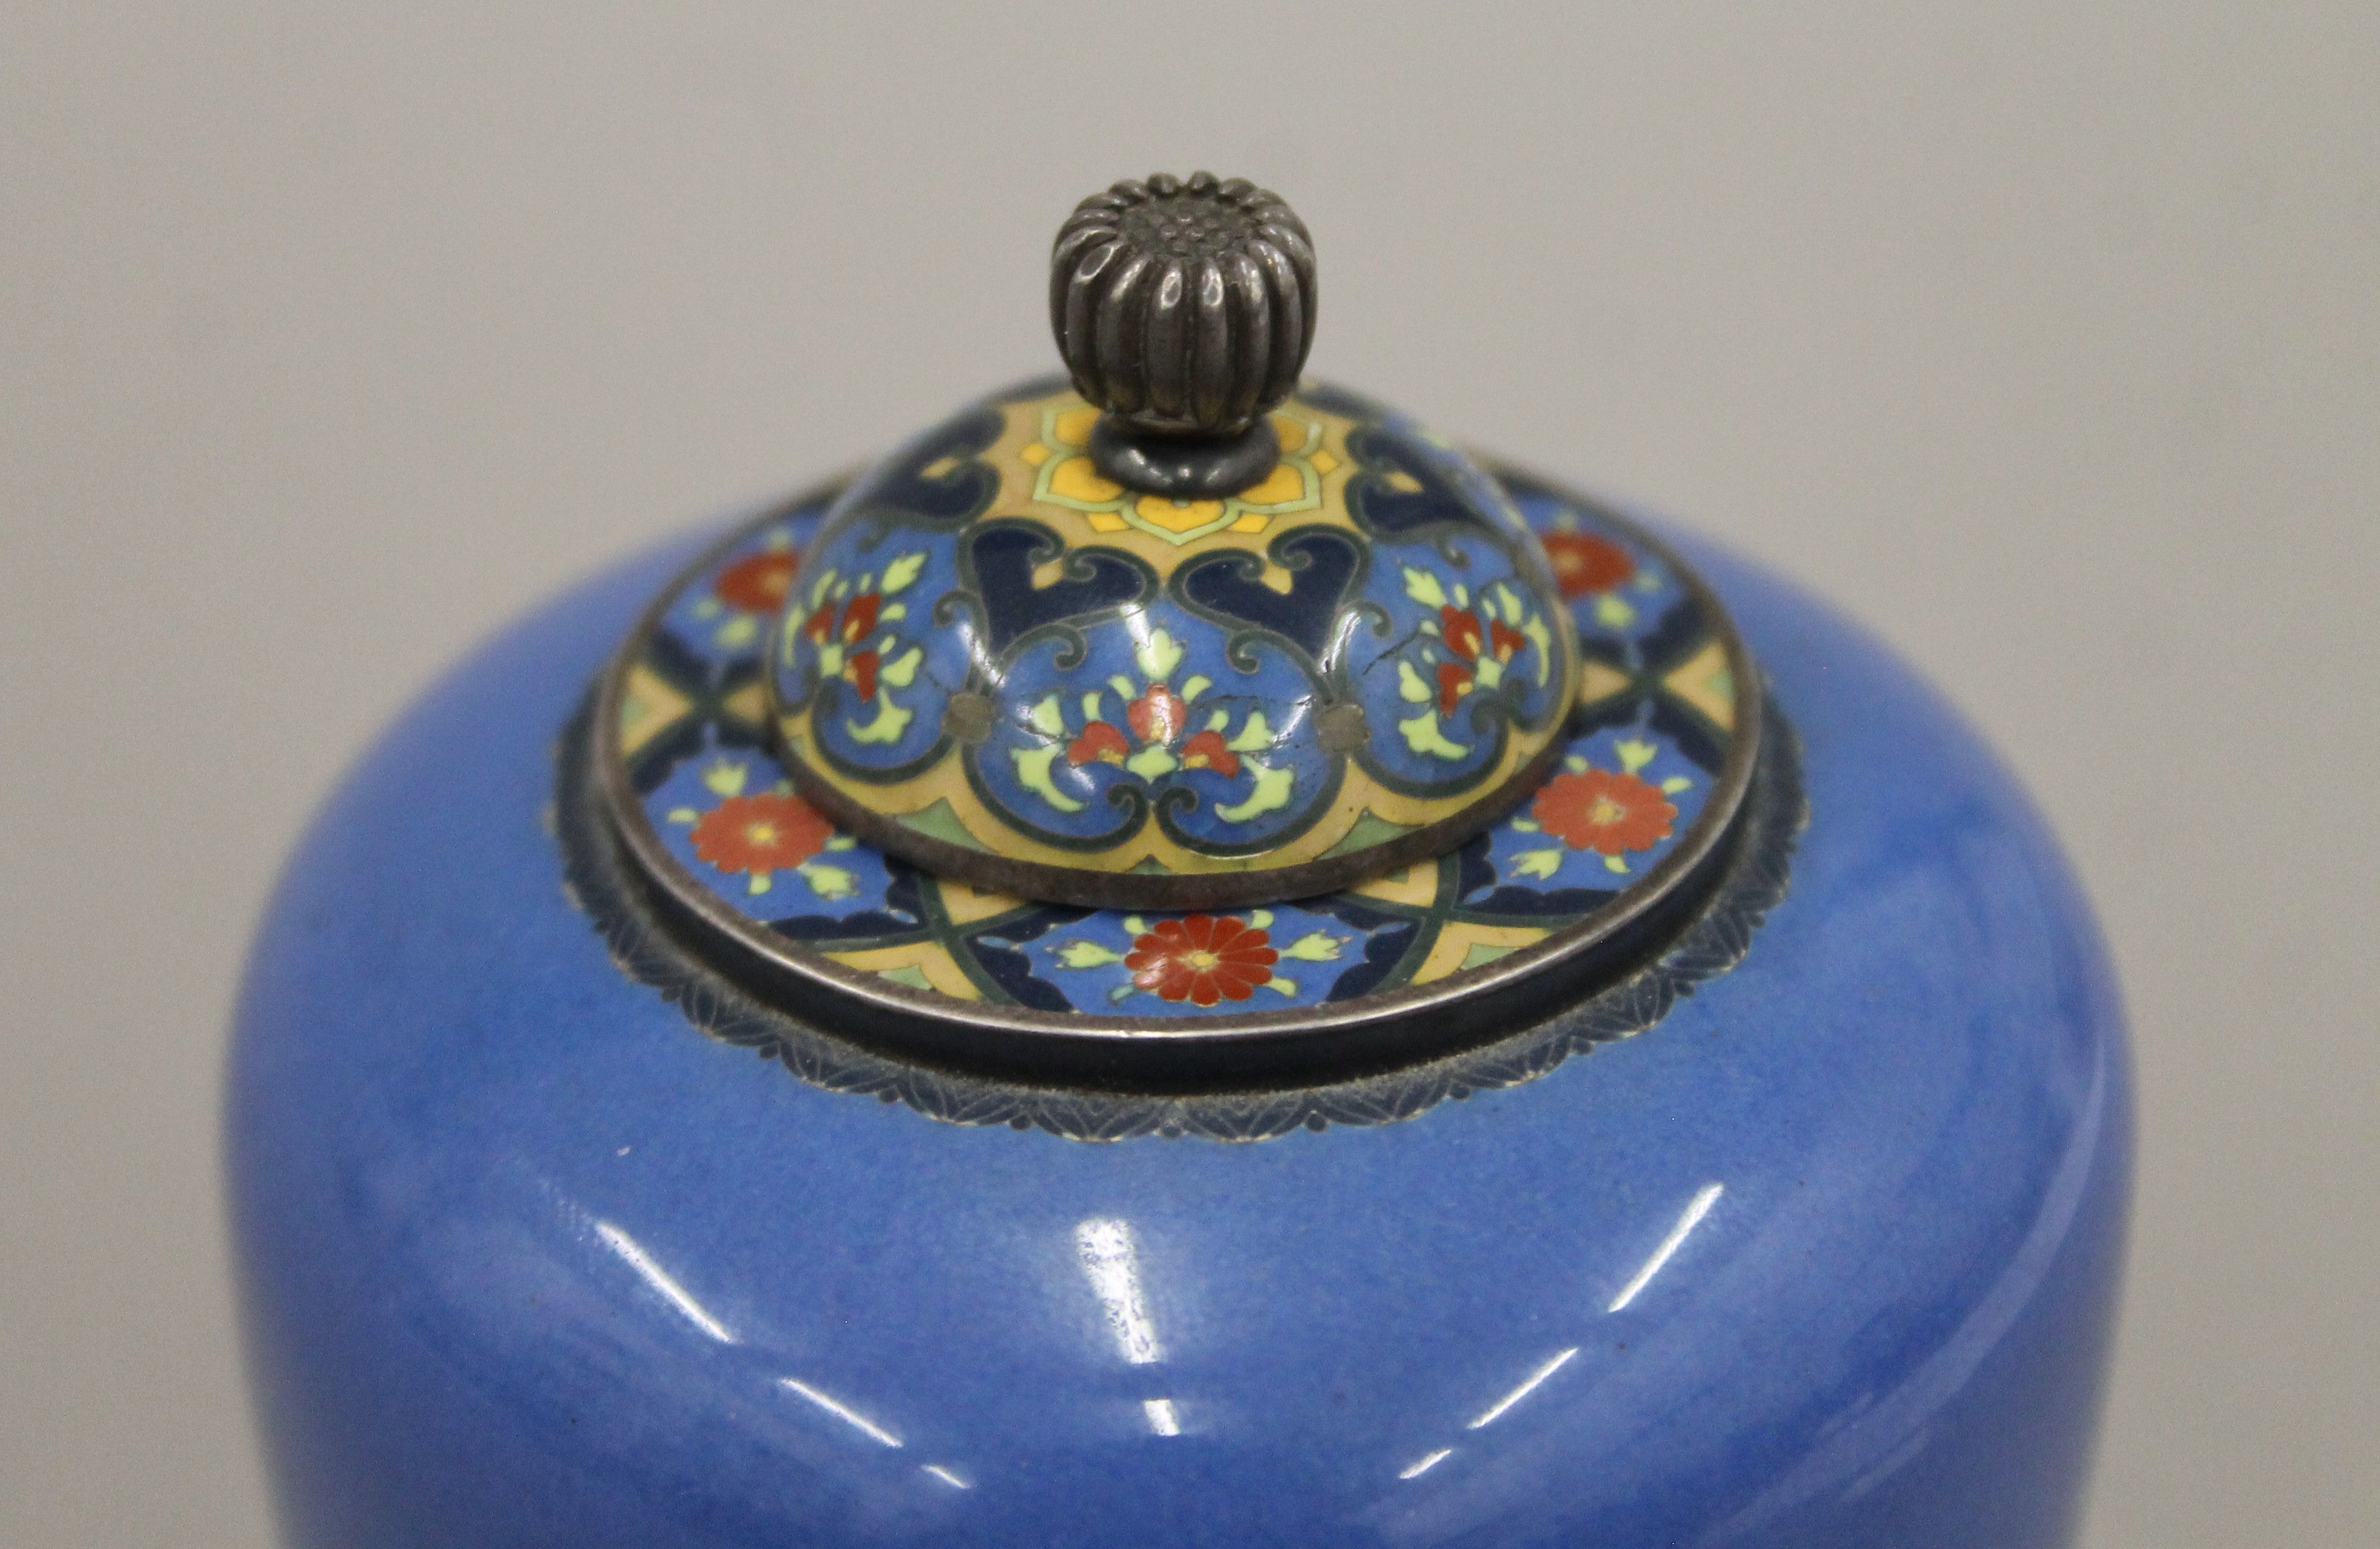 An early 20th century Japanese silver and cloisonne enamel lidded vase decorated with shoreline - Image 3 of 6